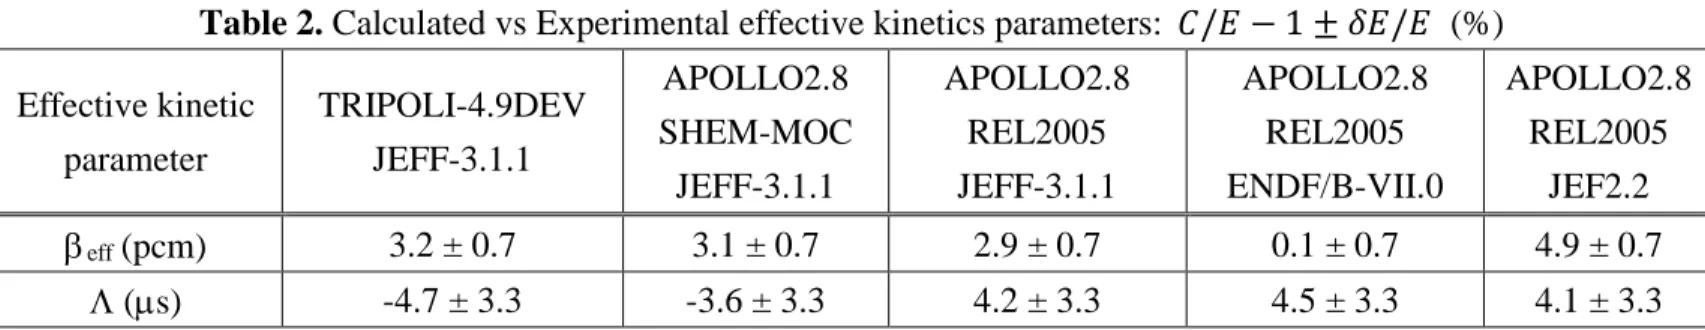 Table 2. Calculated vs Experimental effective kinetics parameters:  